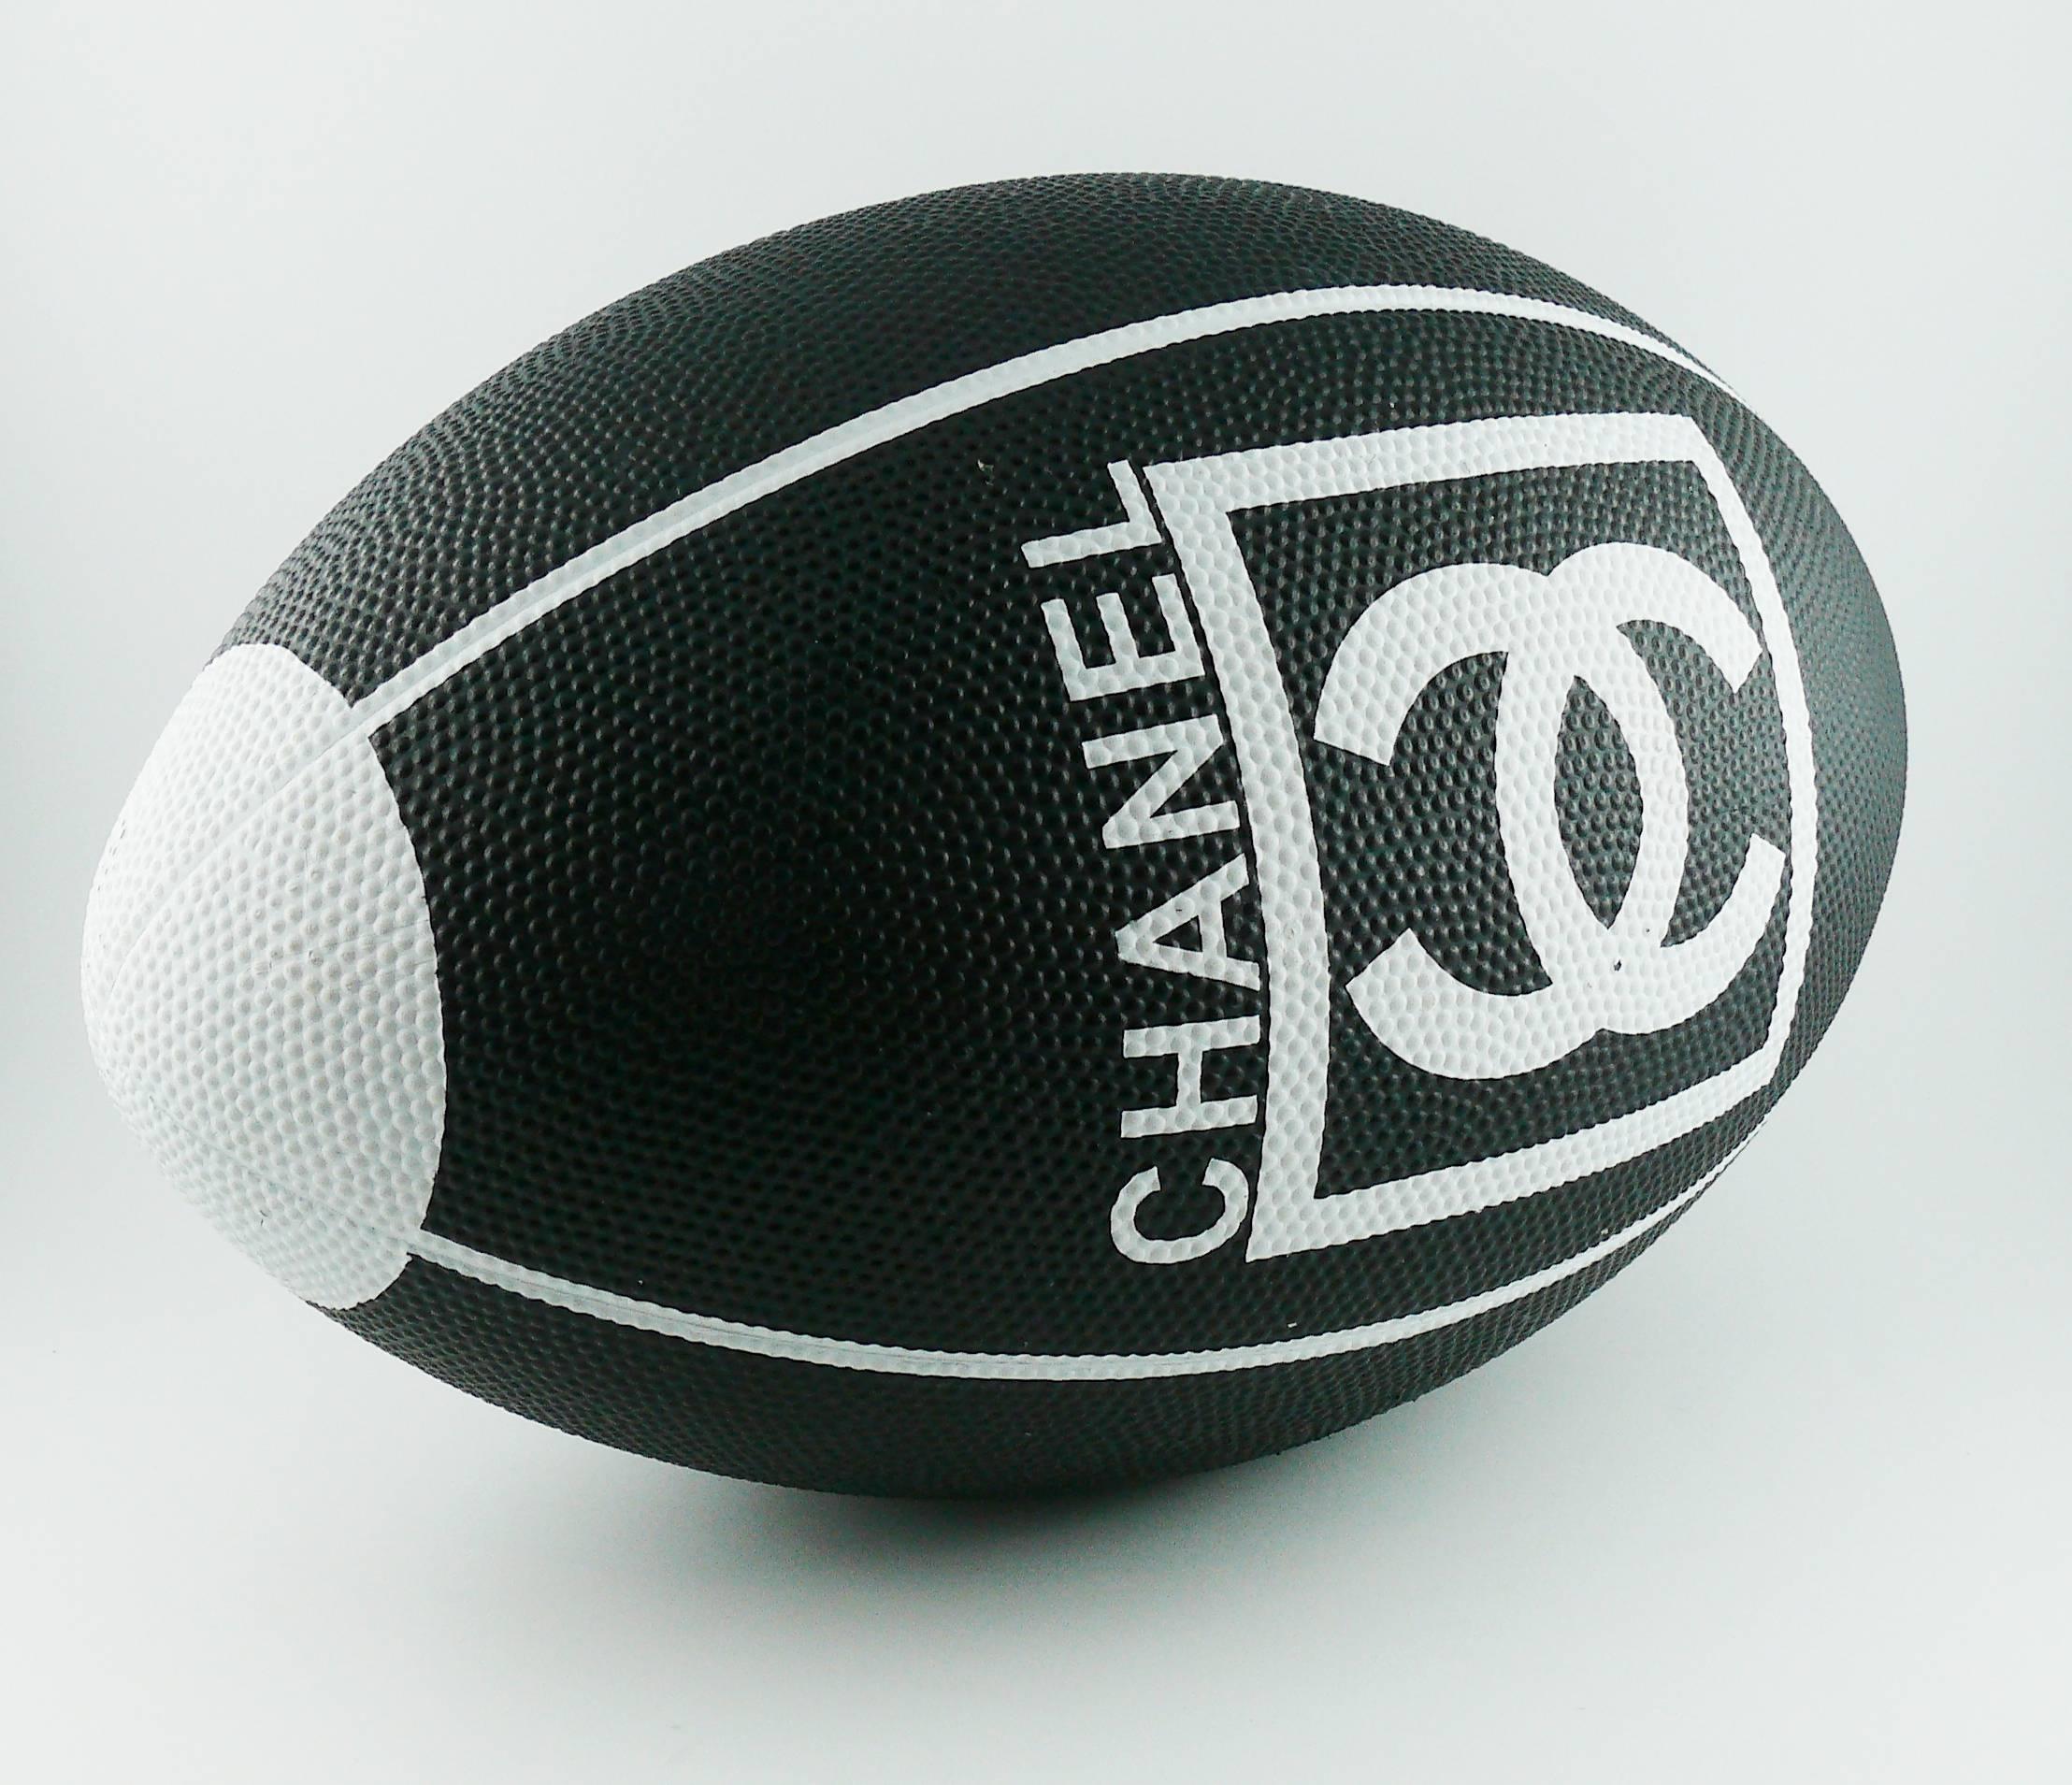 CHANEL rare collector black and white grained rubber rugby ball.

Limited edition manufactured to celebrate the 2007 Rugby World Cup in France.

Indicative measurements : length approx. 28.5 cm (11.22 inches).

NOTES
- This is a preloved